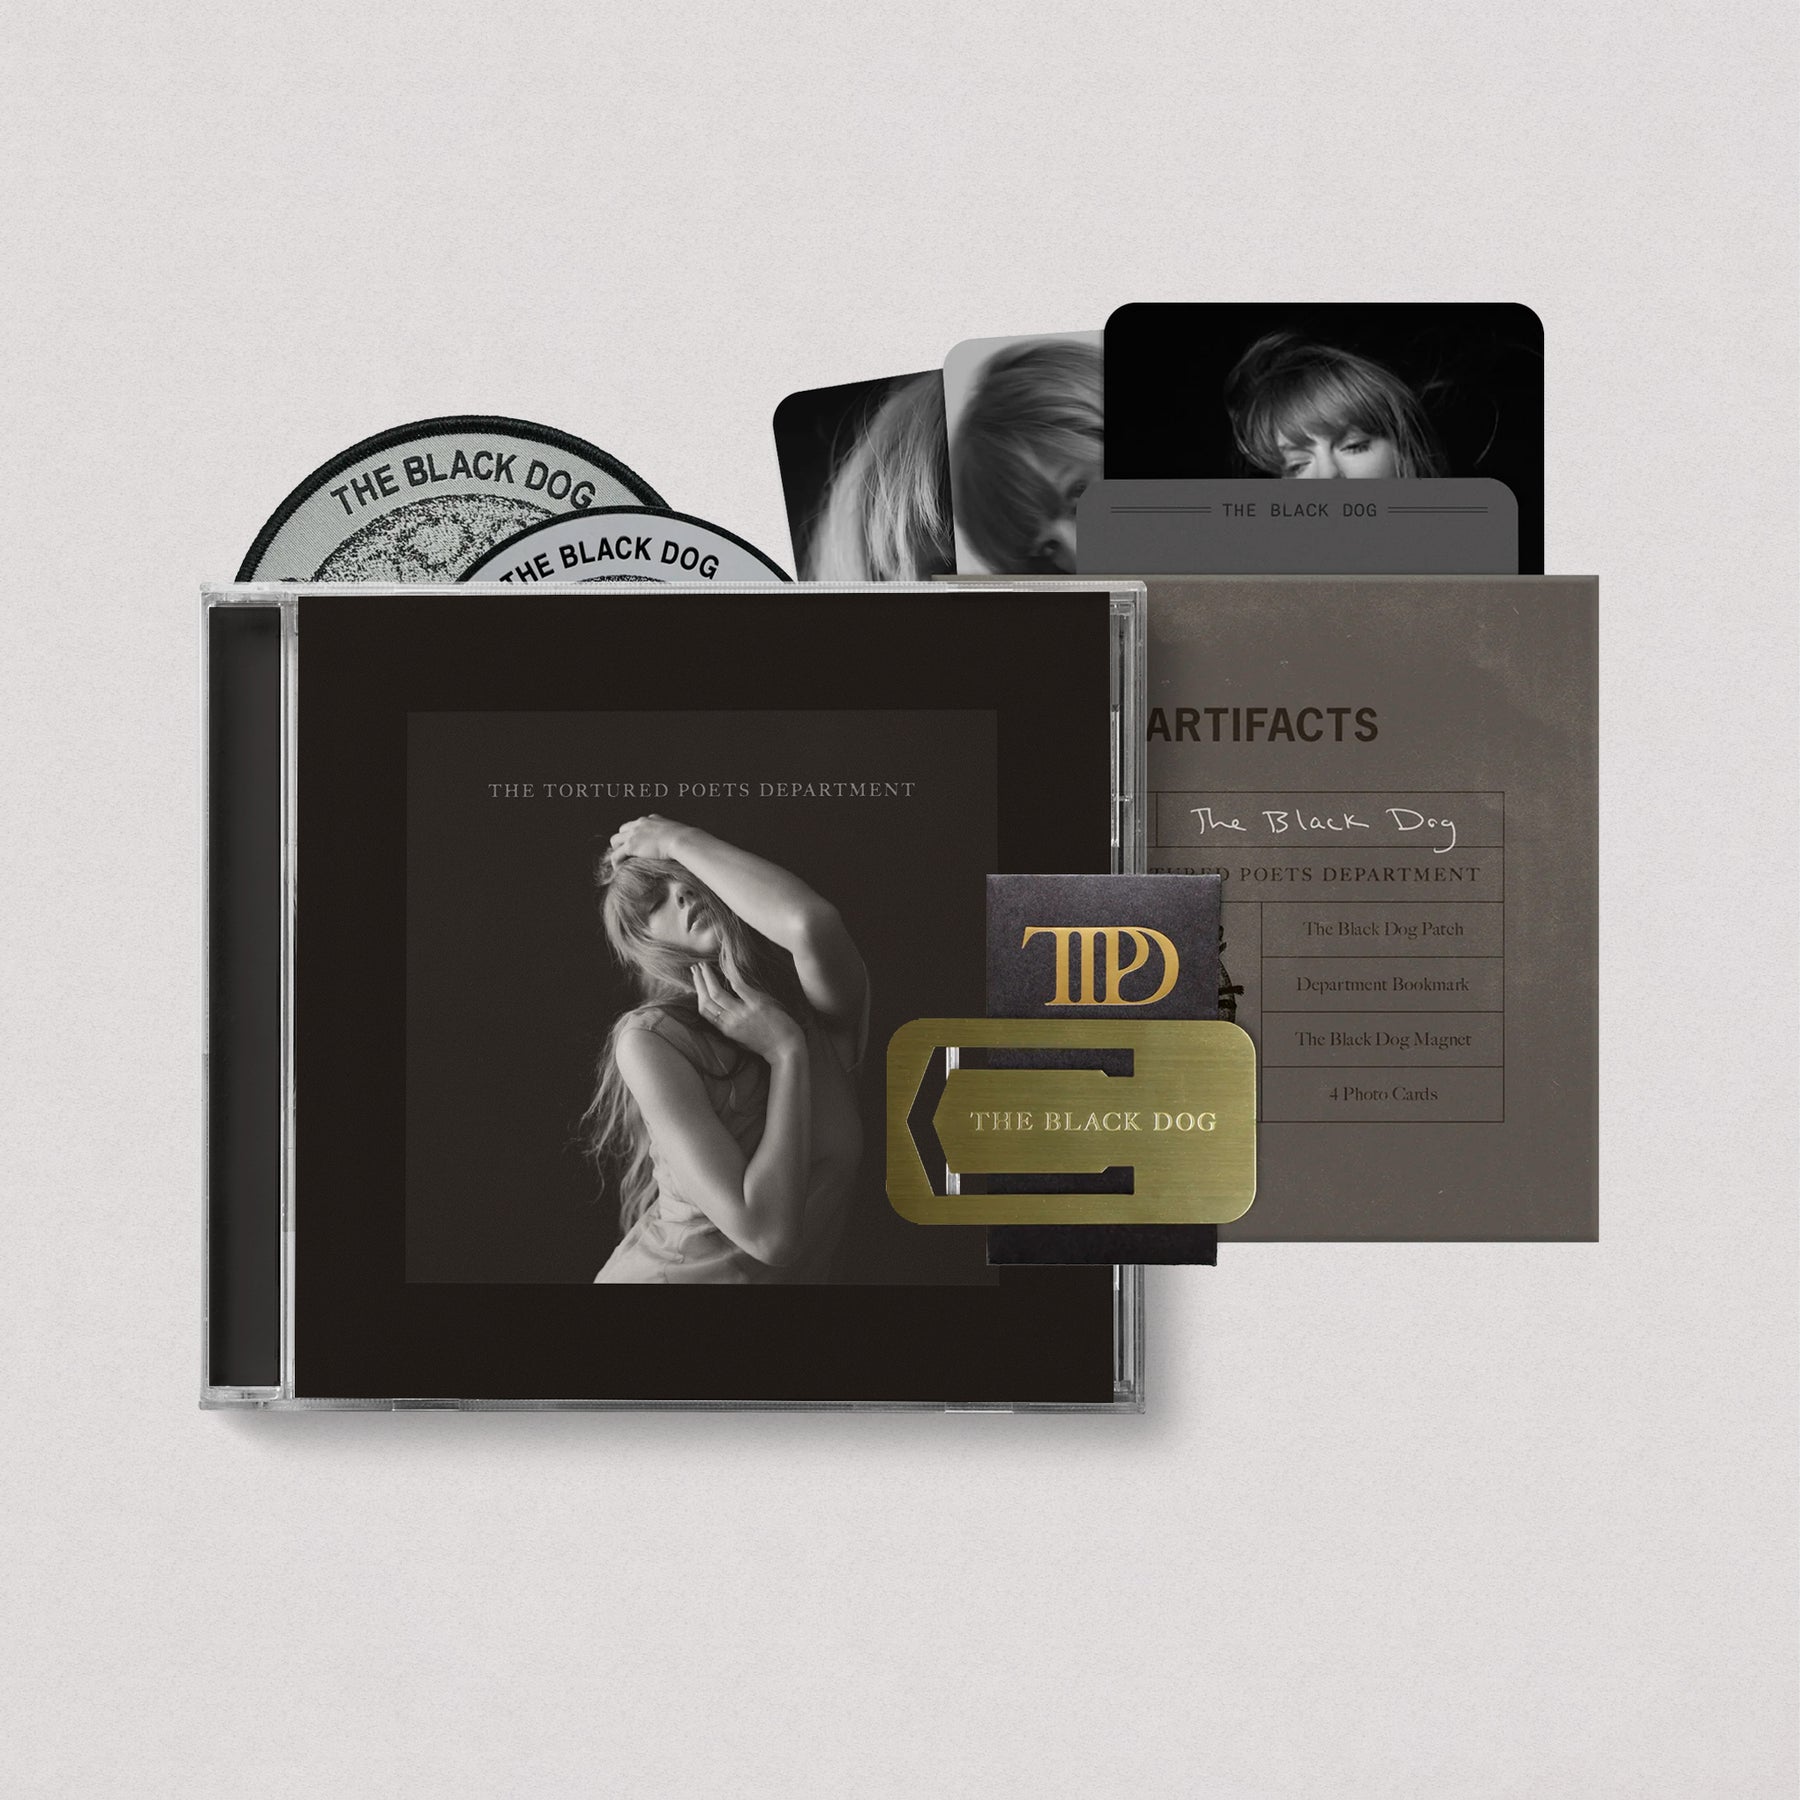 Taylor Swift - The Tortured Poets Department + Bonus Track "The Black Dog" (Deluxe Edition, CD)